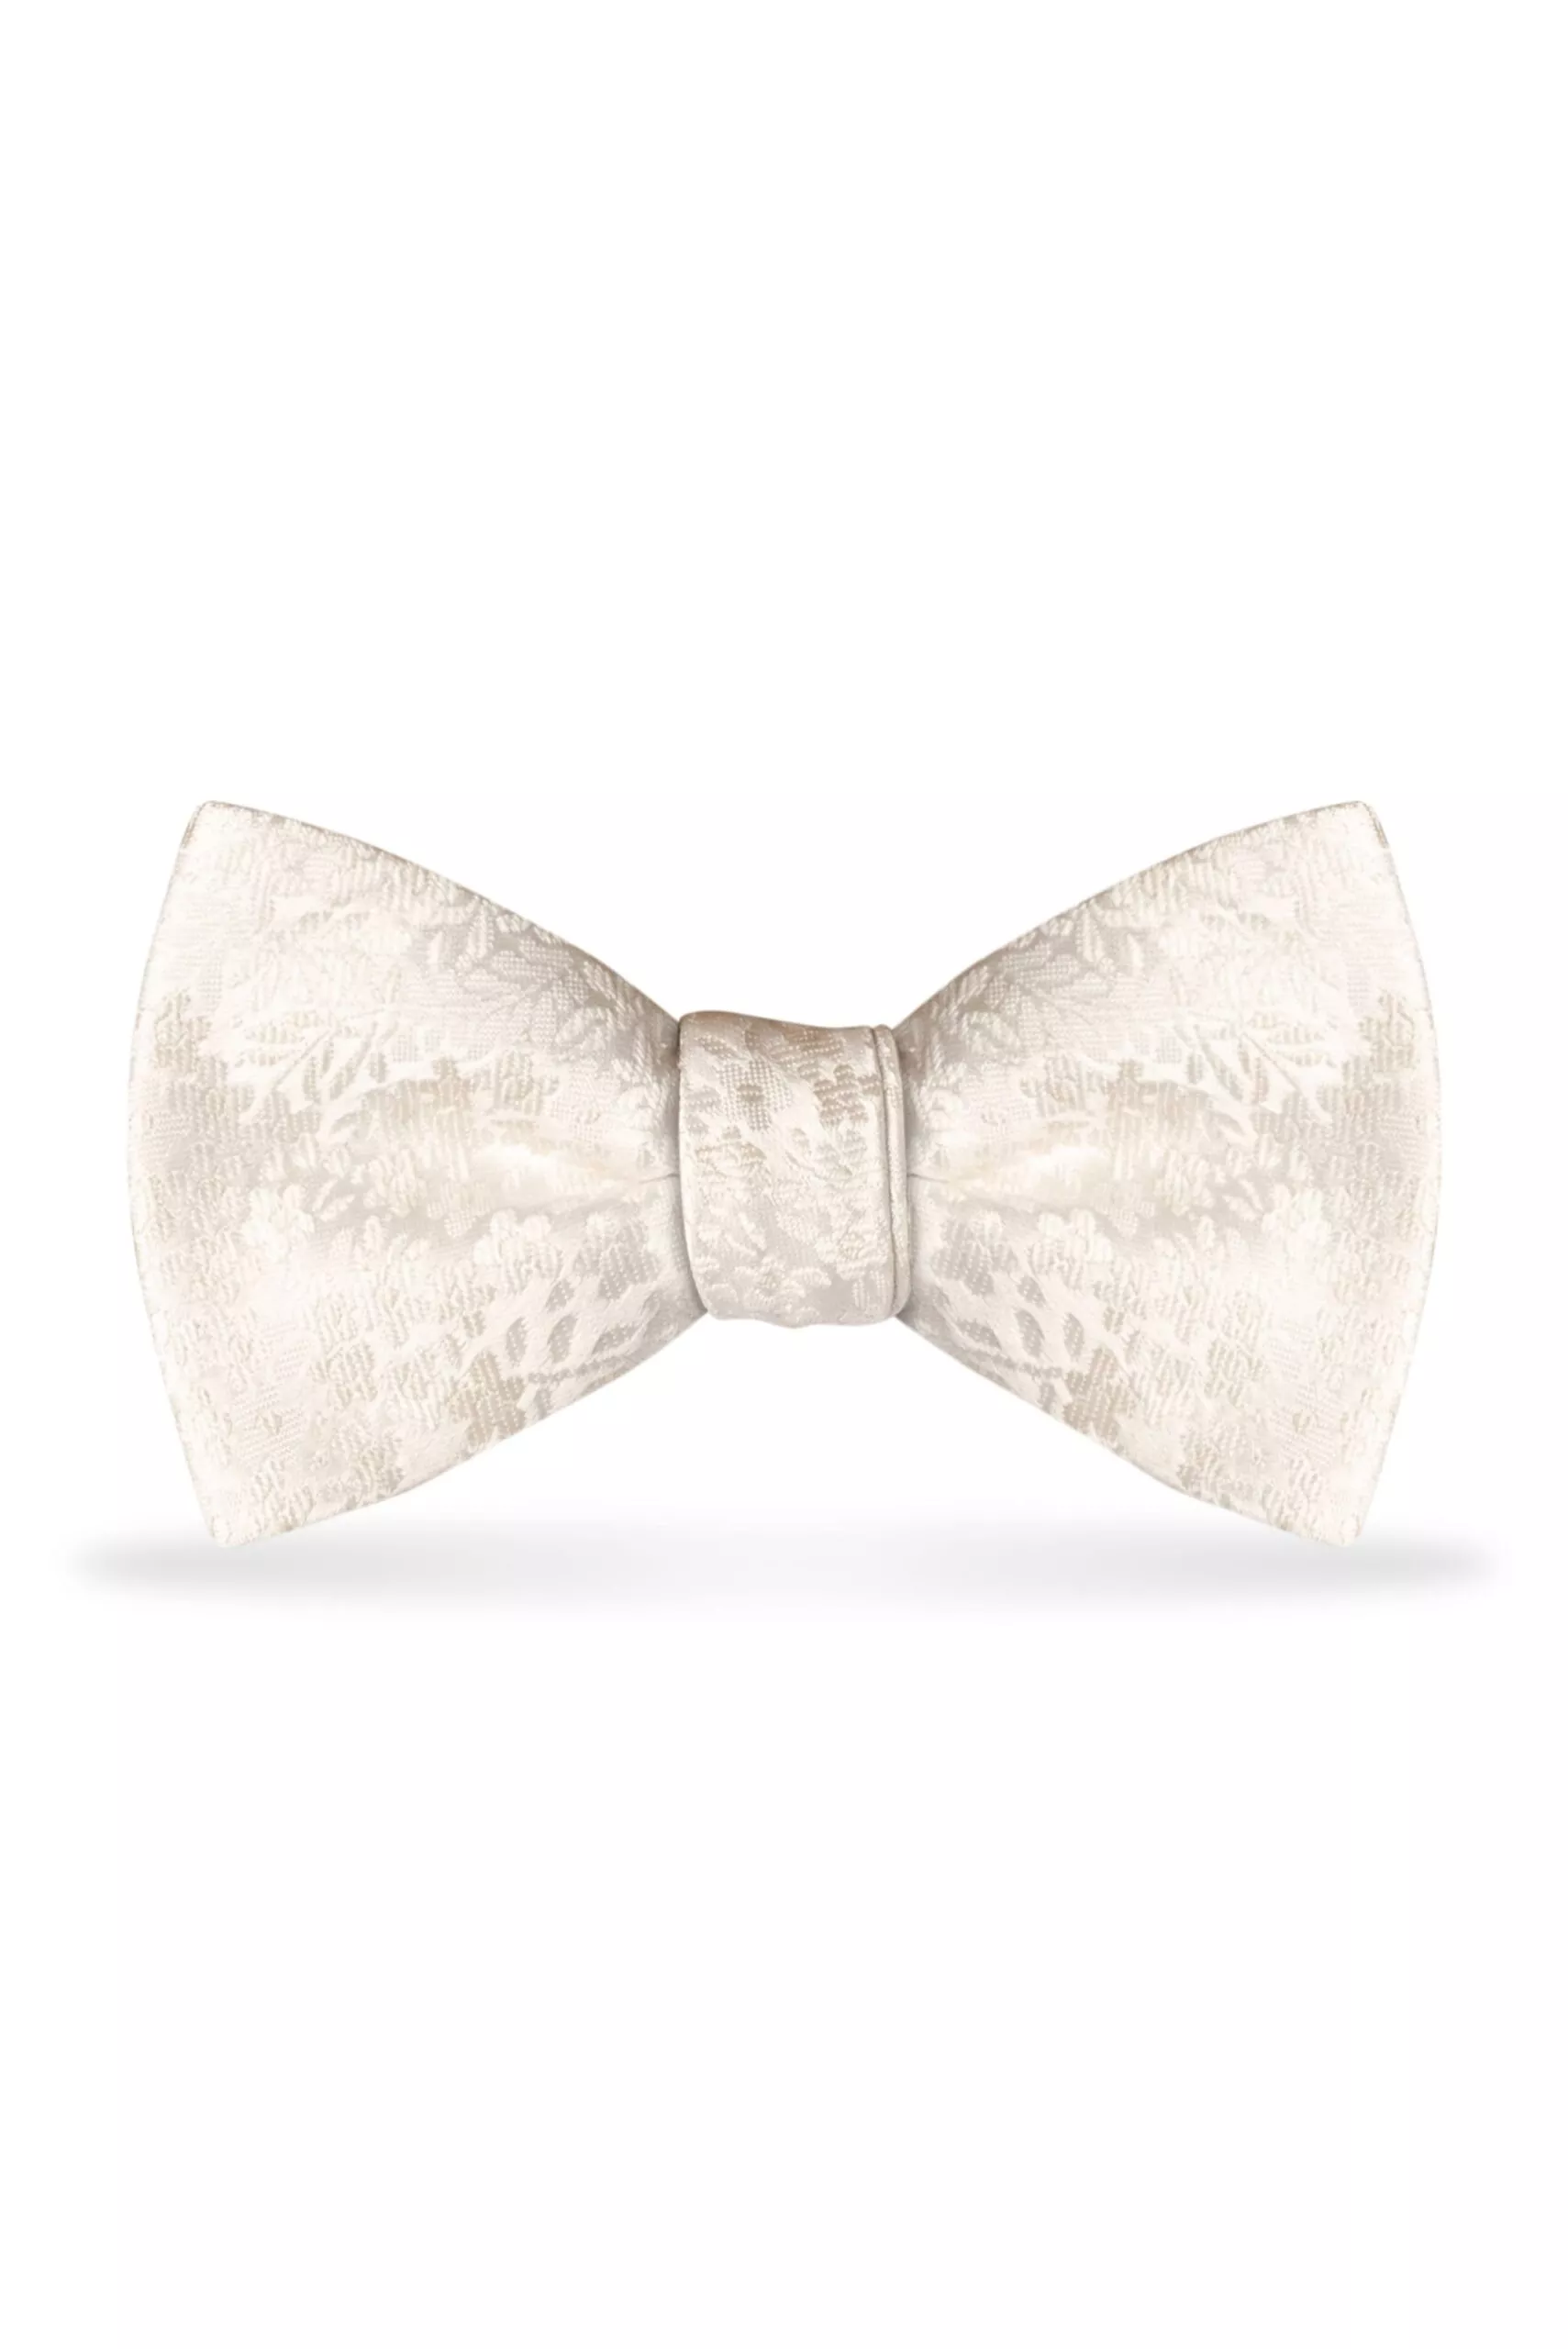 Floral Ivory Bow Tie